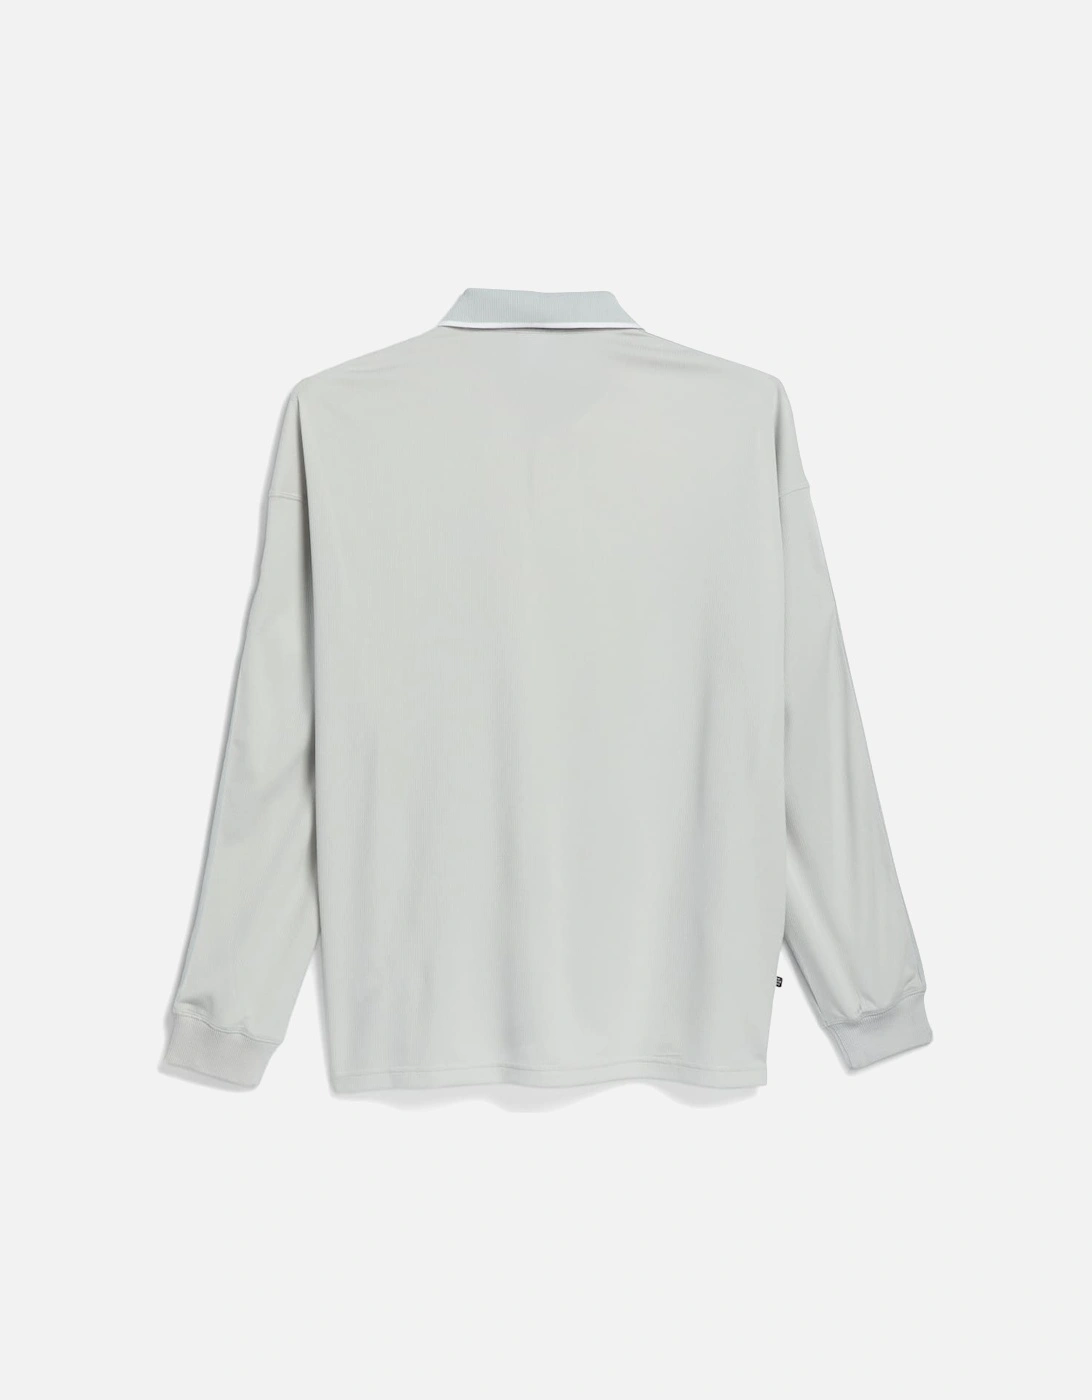 Long Sleeve Polo Jersey (Gender Neutral)